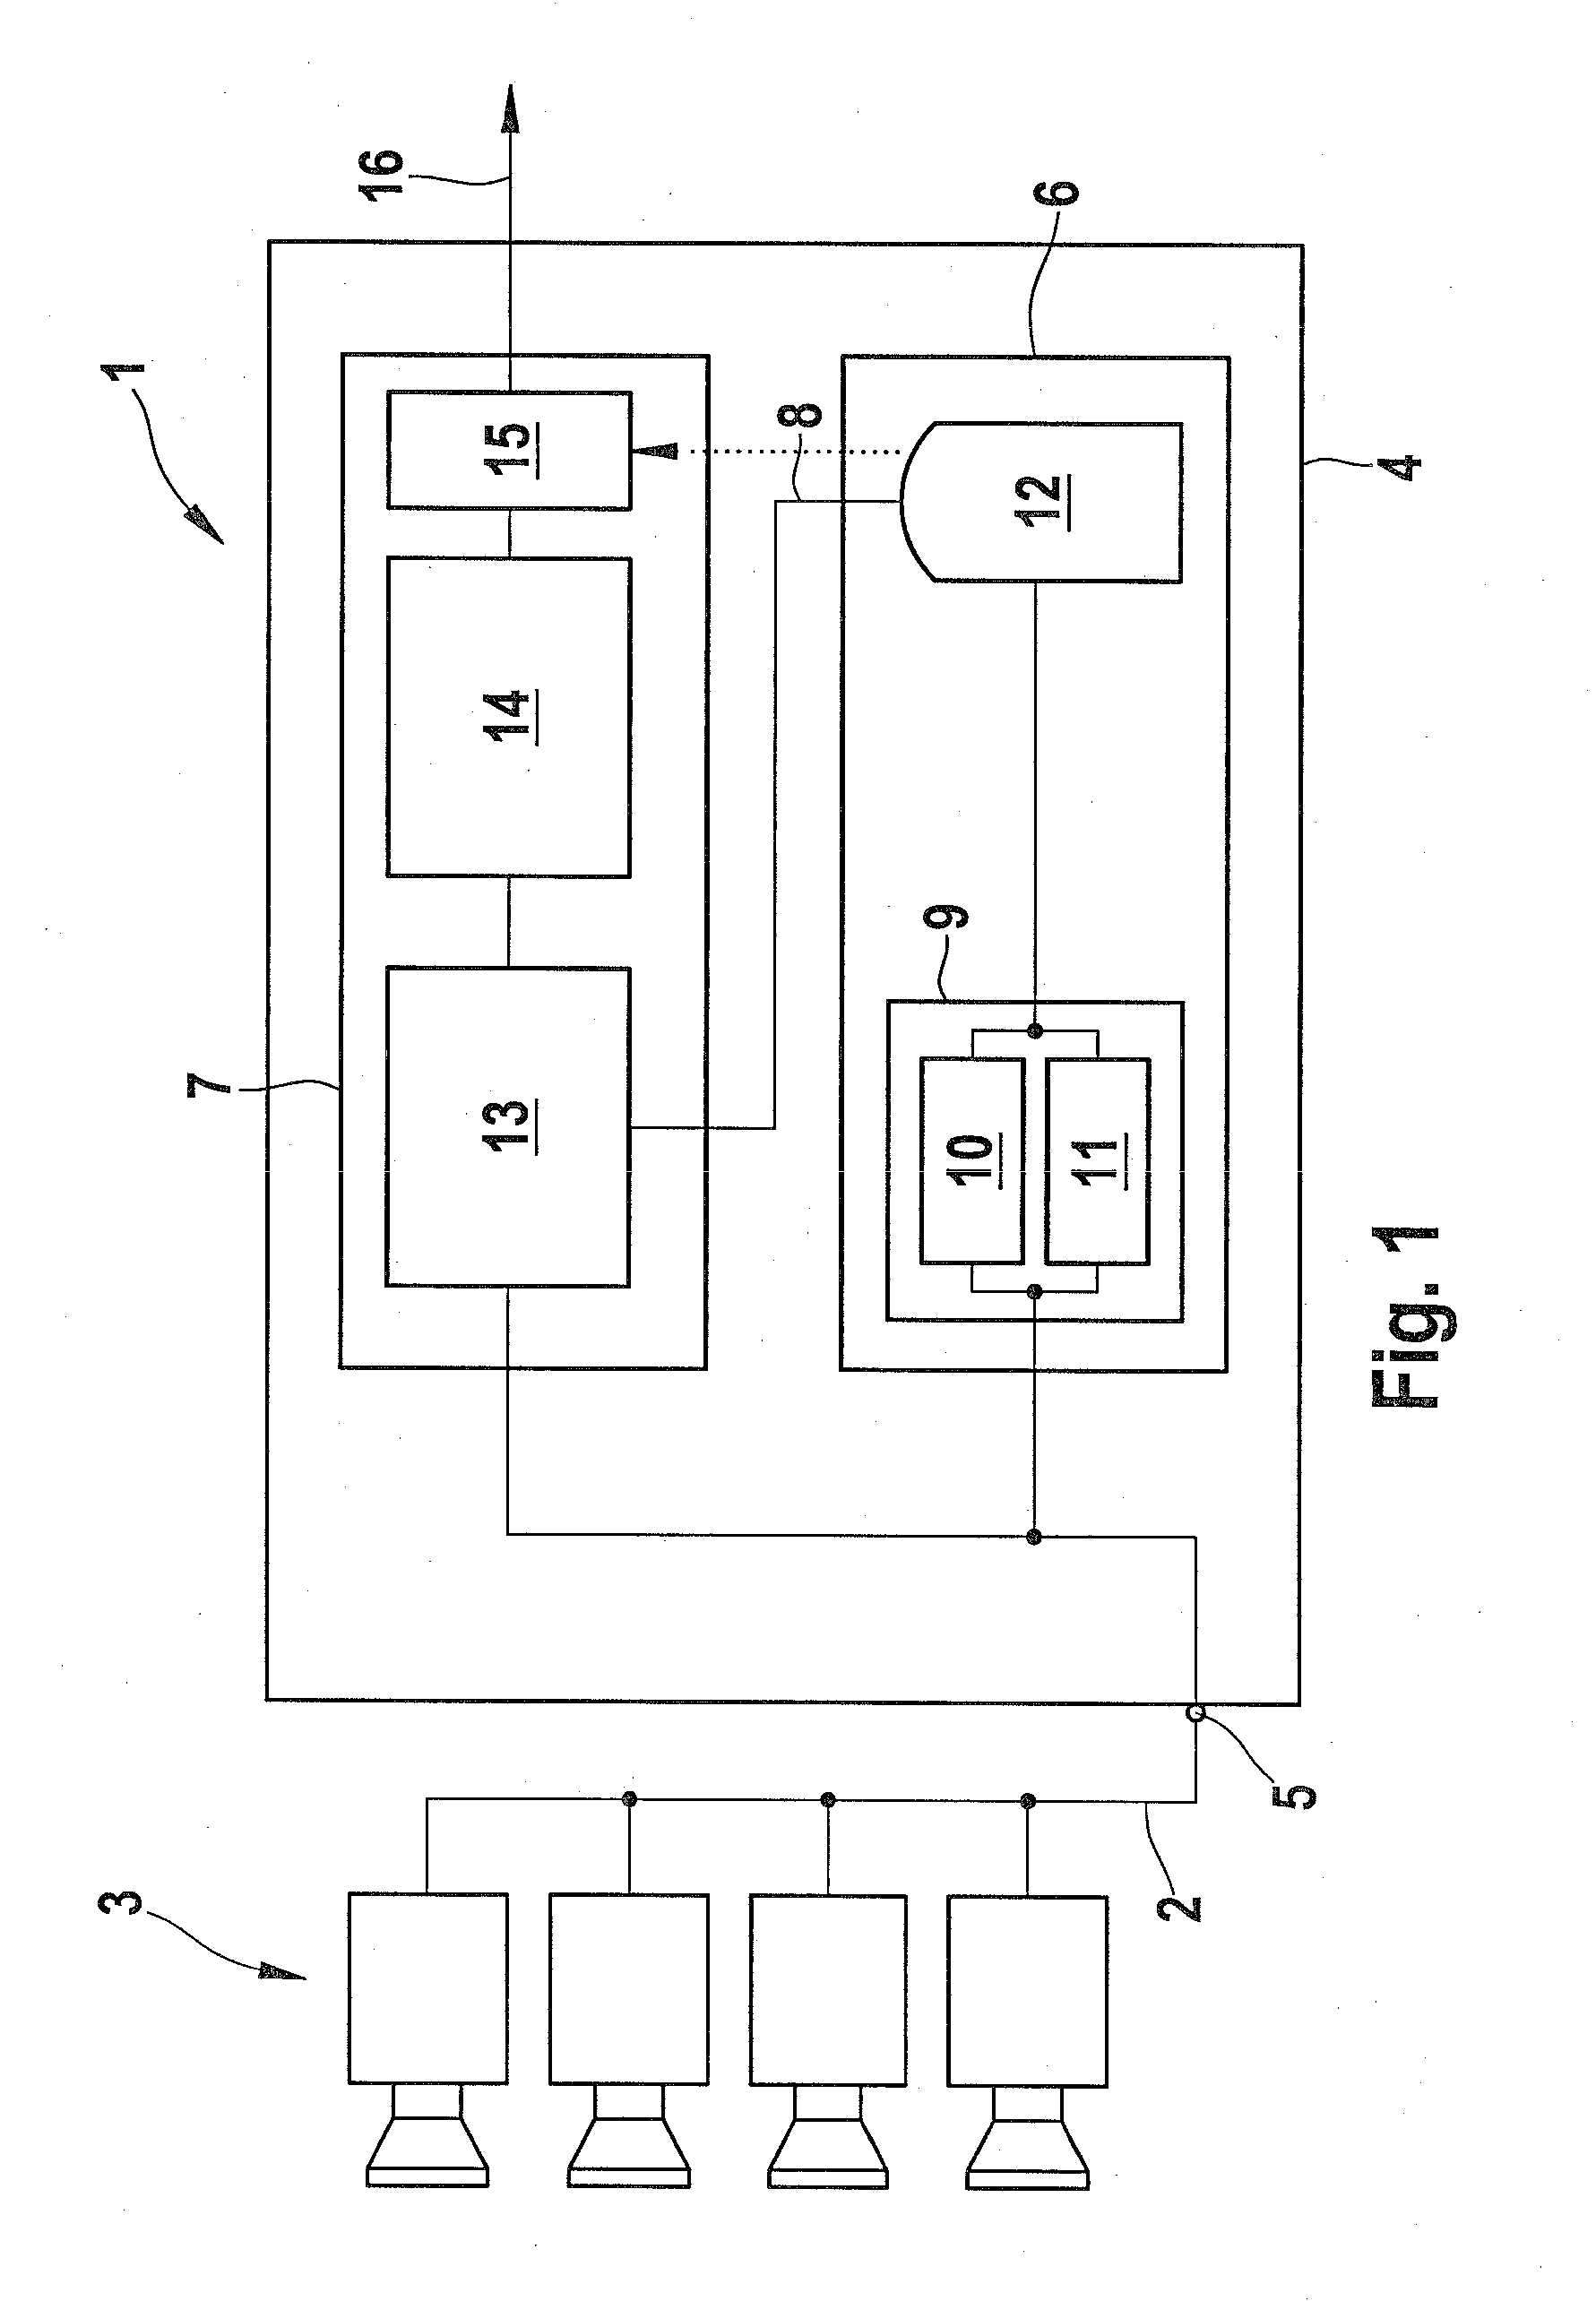 Image-processing device, surveillance system, method for establishing a scene reference image, and computer program